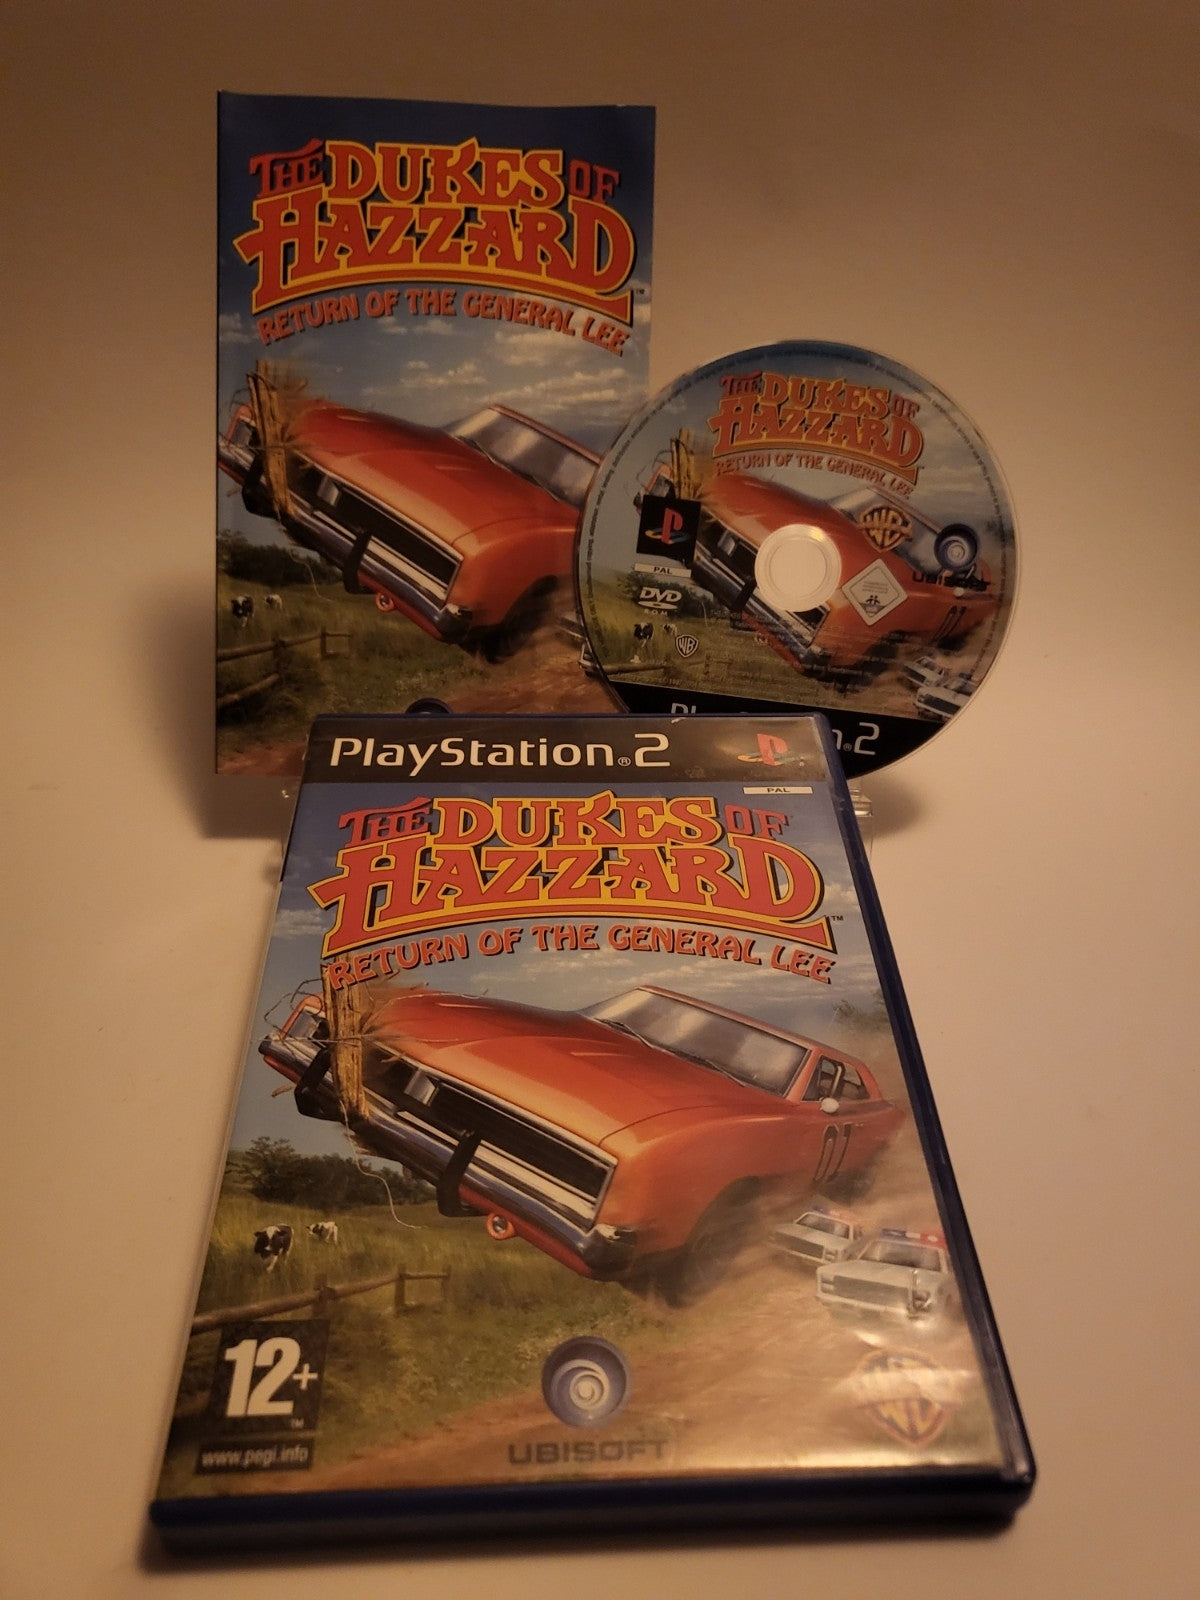 the Dukes of Hazzard Return of the General Lee PS2